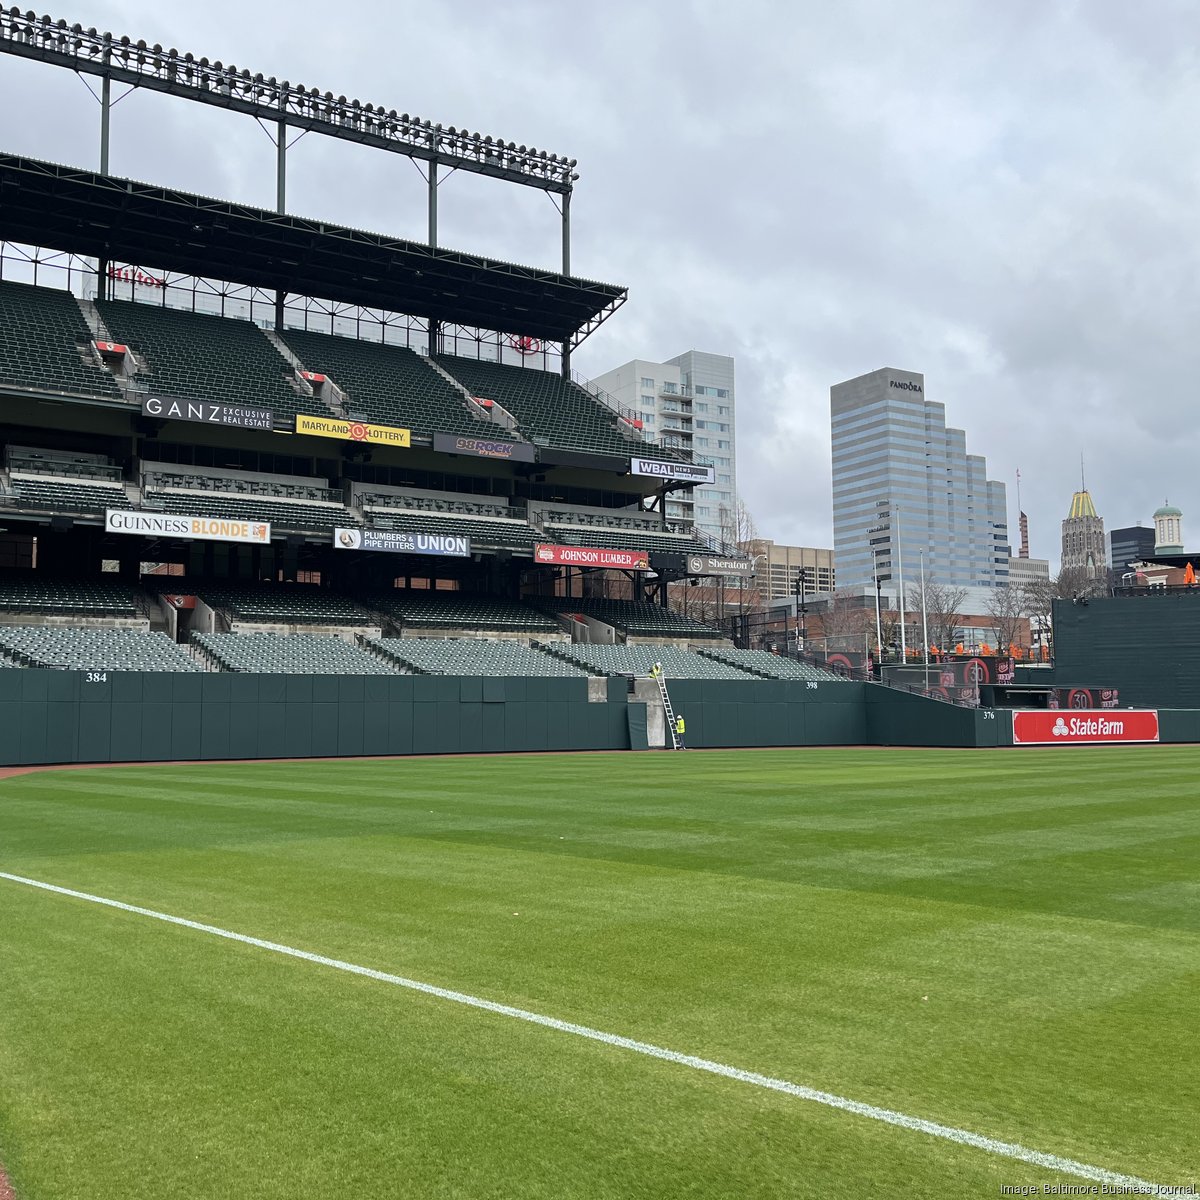 Orioles Announce Giveaways, Promotions, and Events for the 2021 Season at  Oriole Park